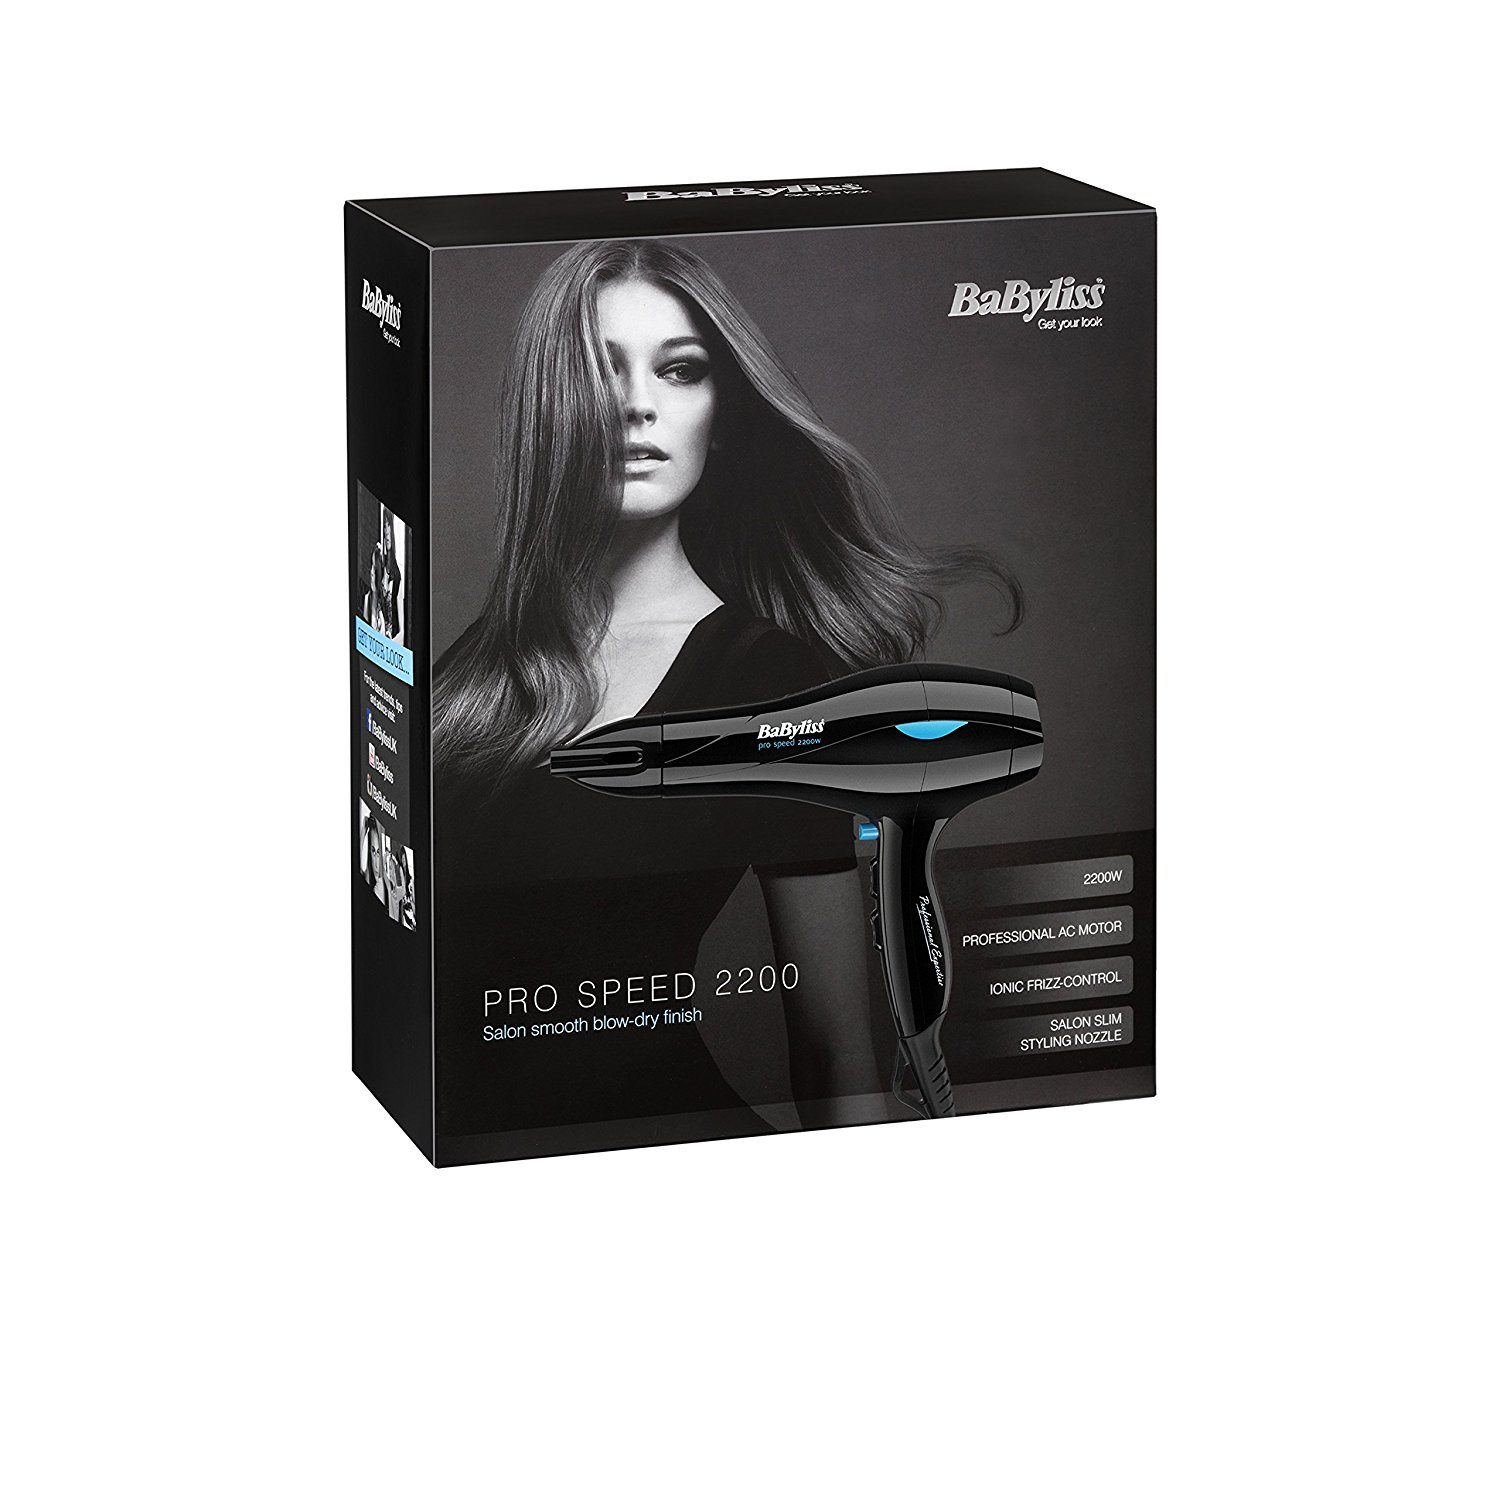 BaByliss Speed Pro 2200 Hair Dryer review